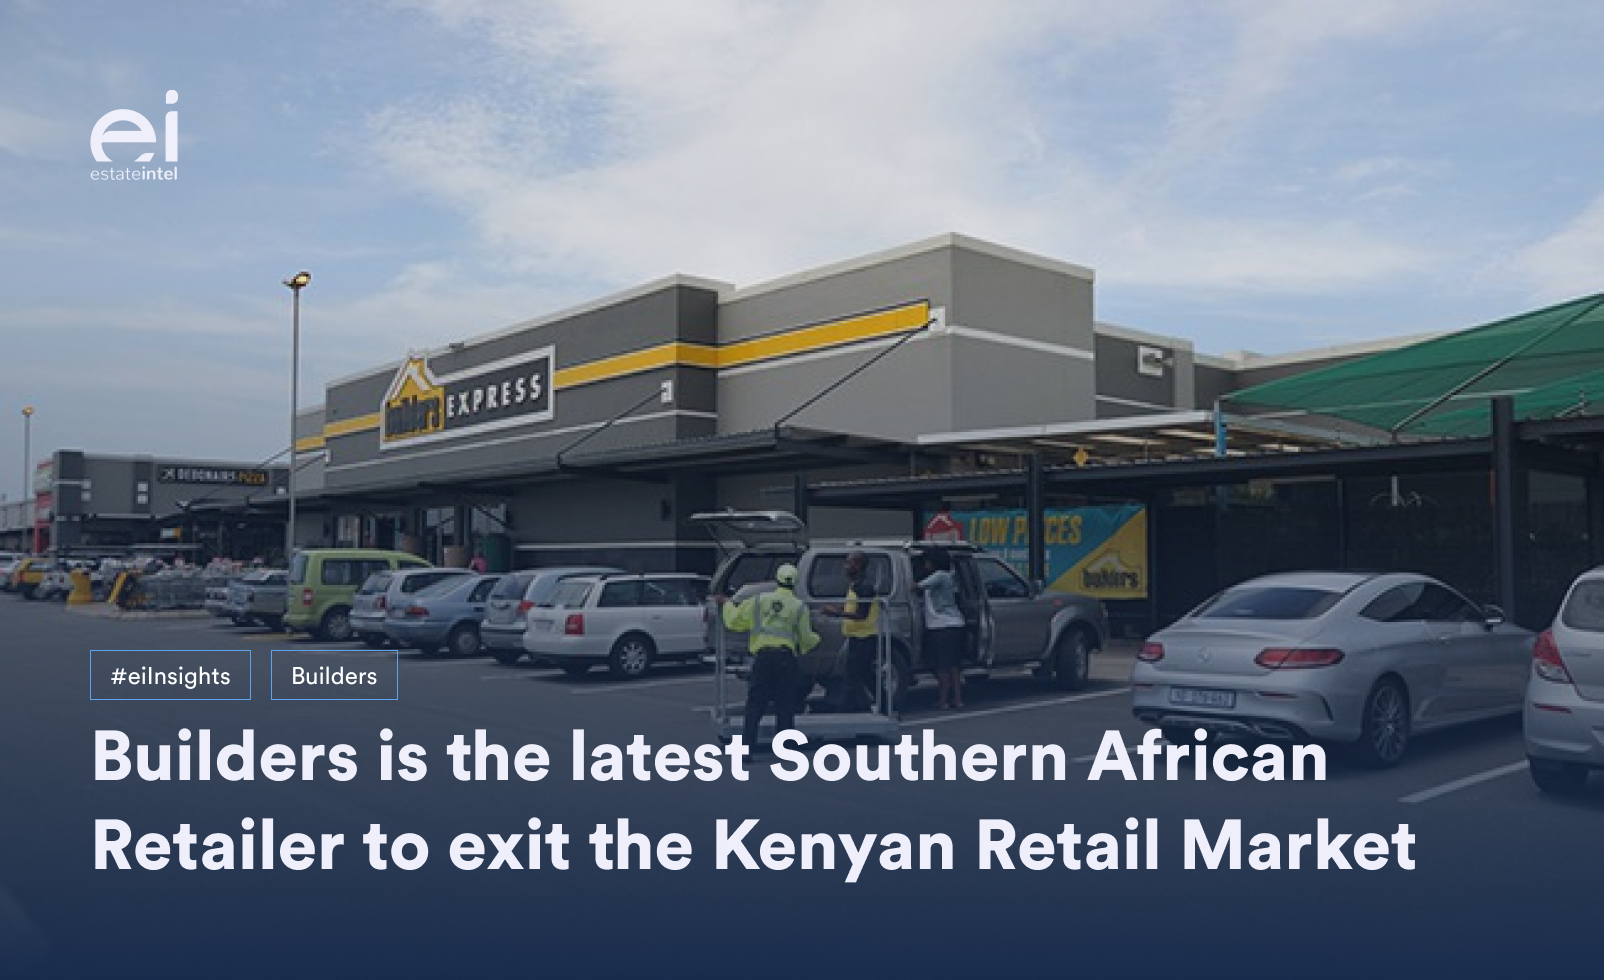 Builders is the latest Southern African Retailer to exit the Kenyan Market